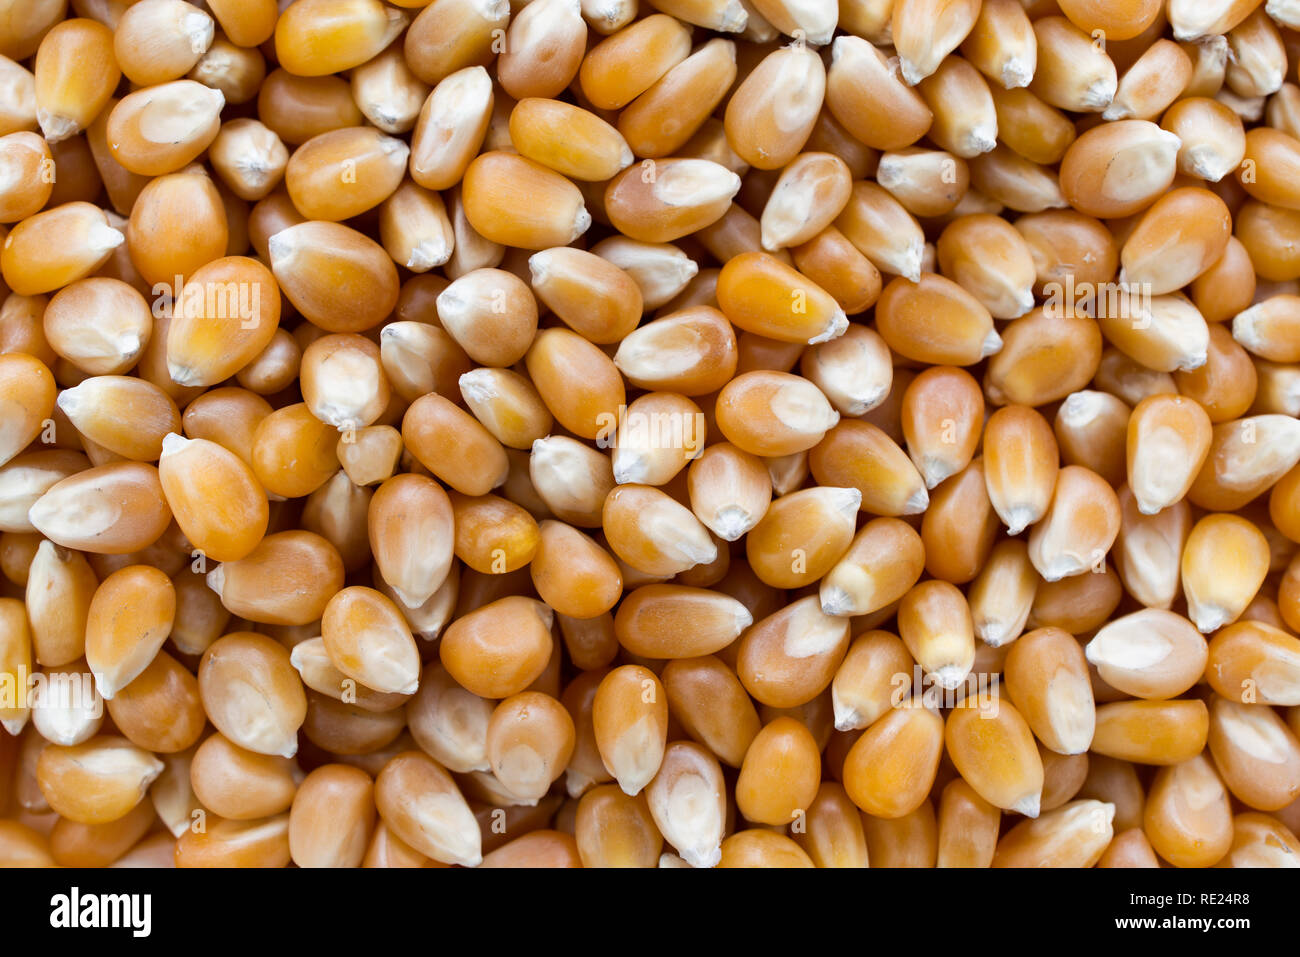 Popcorn maize close up abstract background. Stock Photo